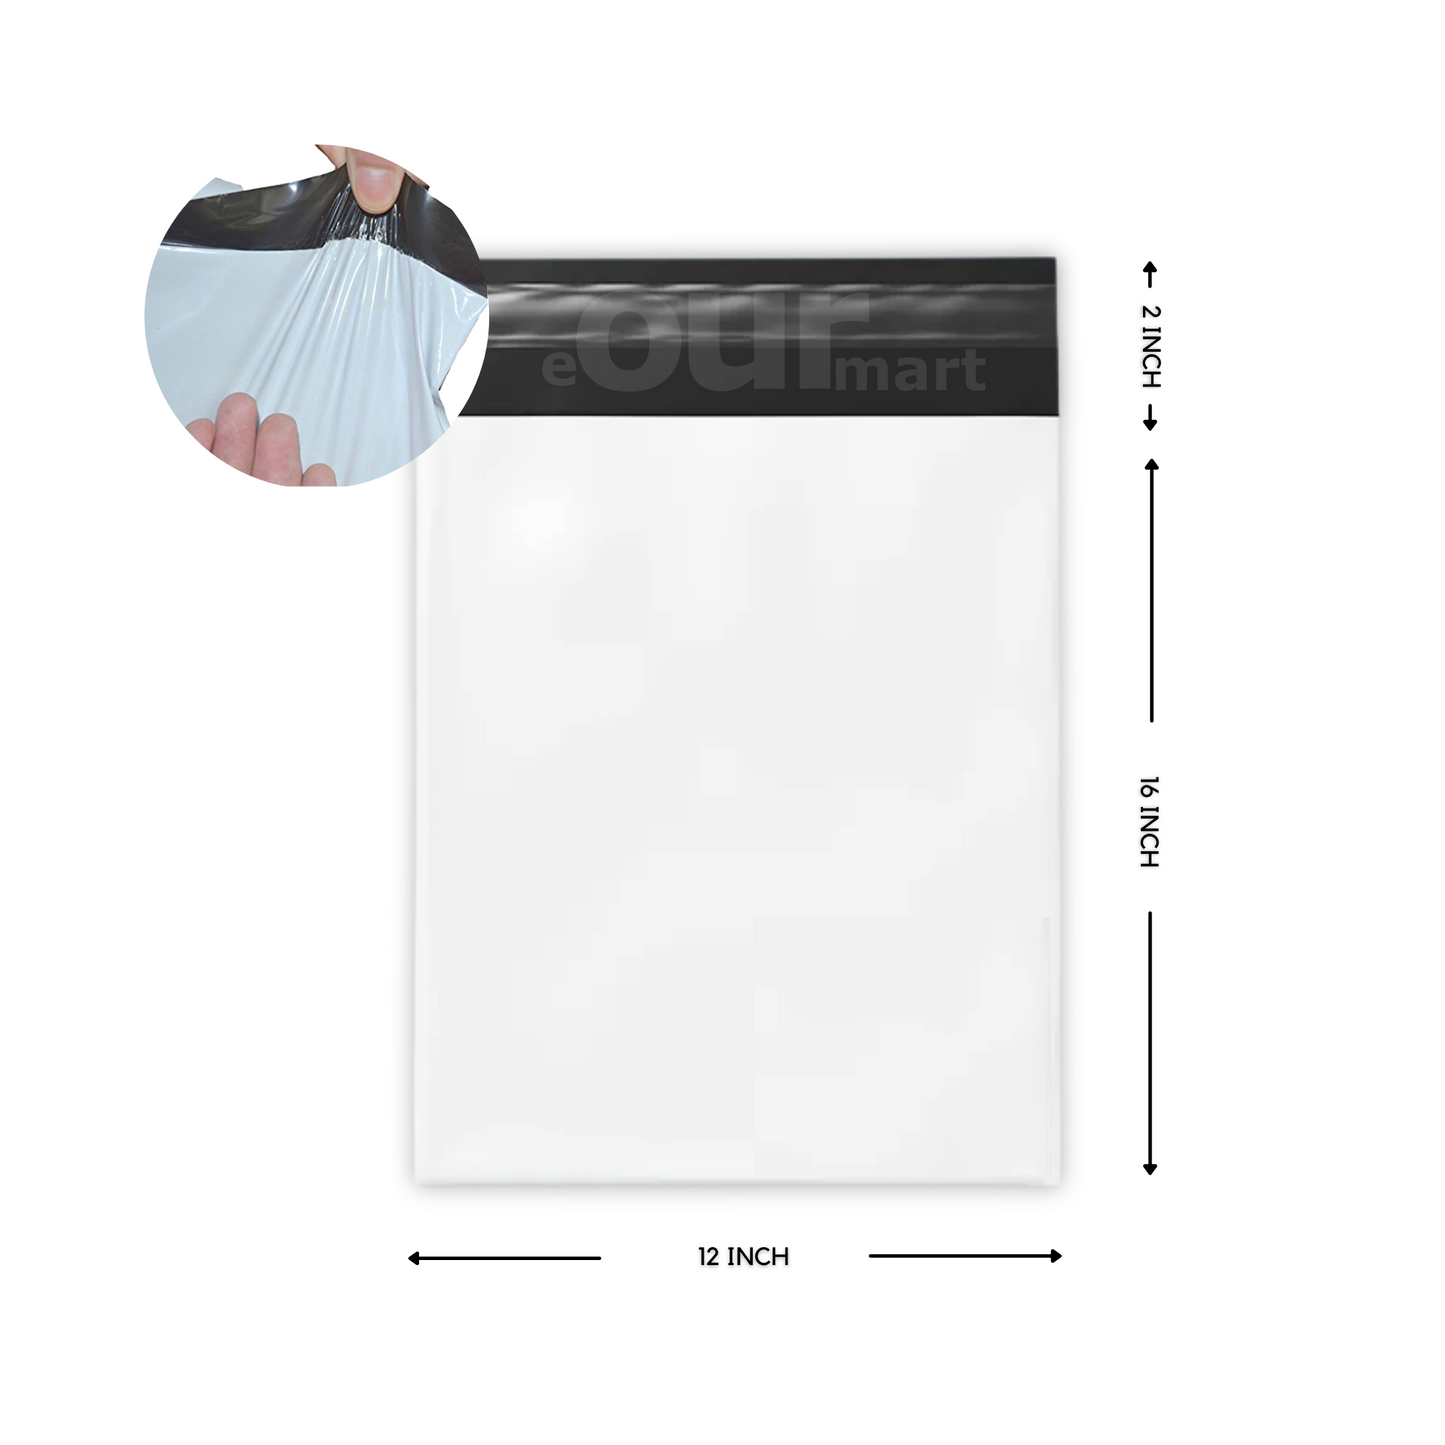 Courier Bags/Envelopes/Pouches/Cover 12X16 inches+ 2inch Flap  Pack of 100 Tamper Proof Plastic Polybags for Shipping/Packing (With POD)